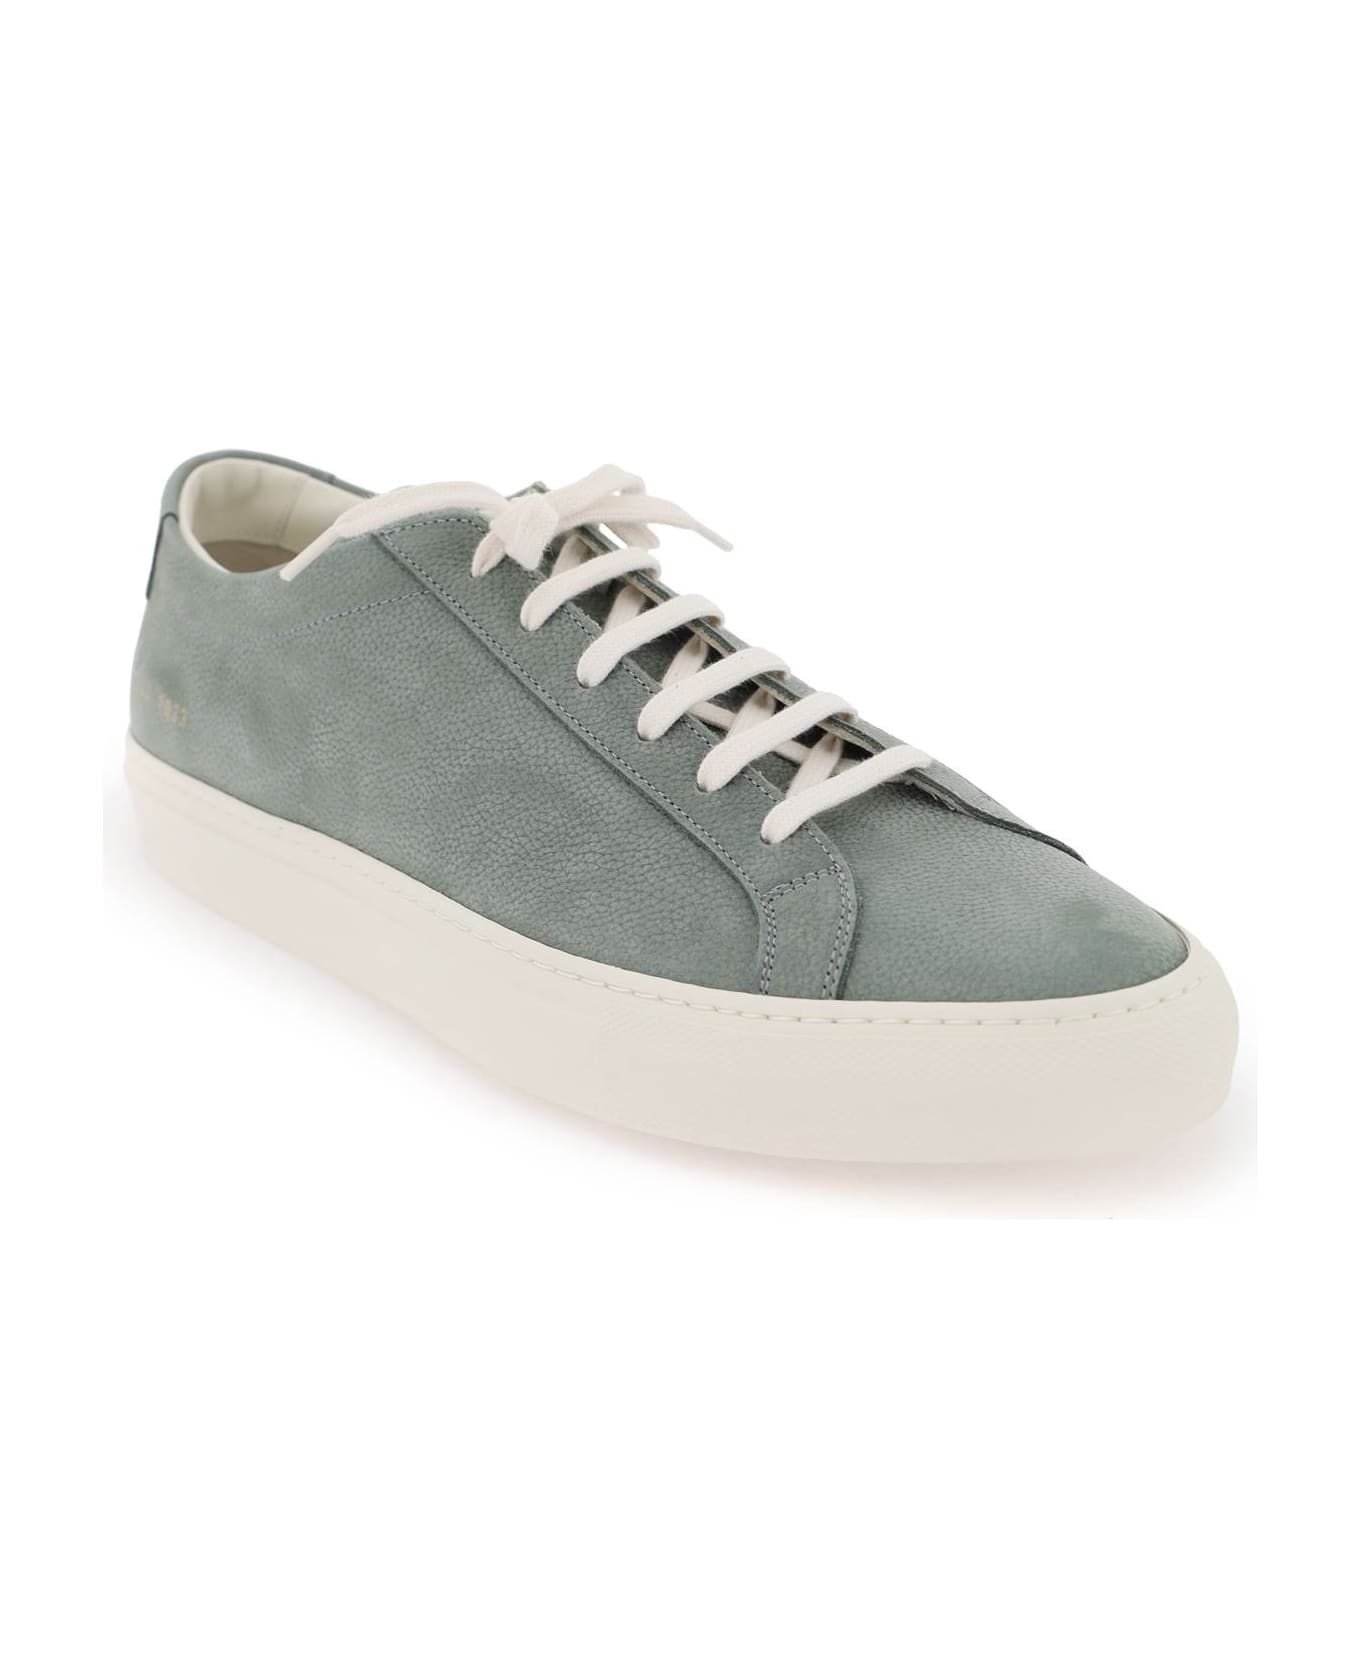 Common Projects Original Achilles Sneakers - SAGE (Green)